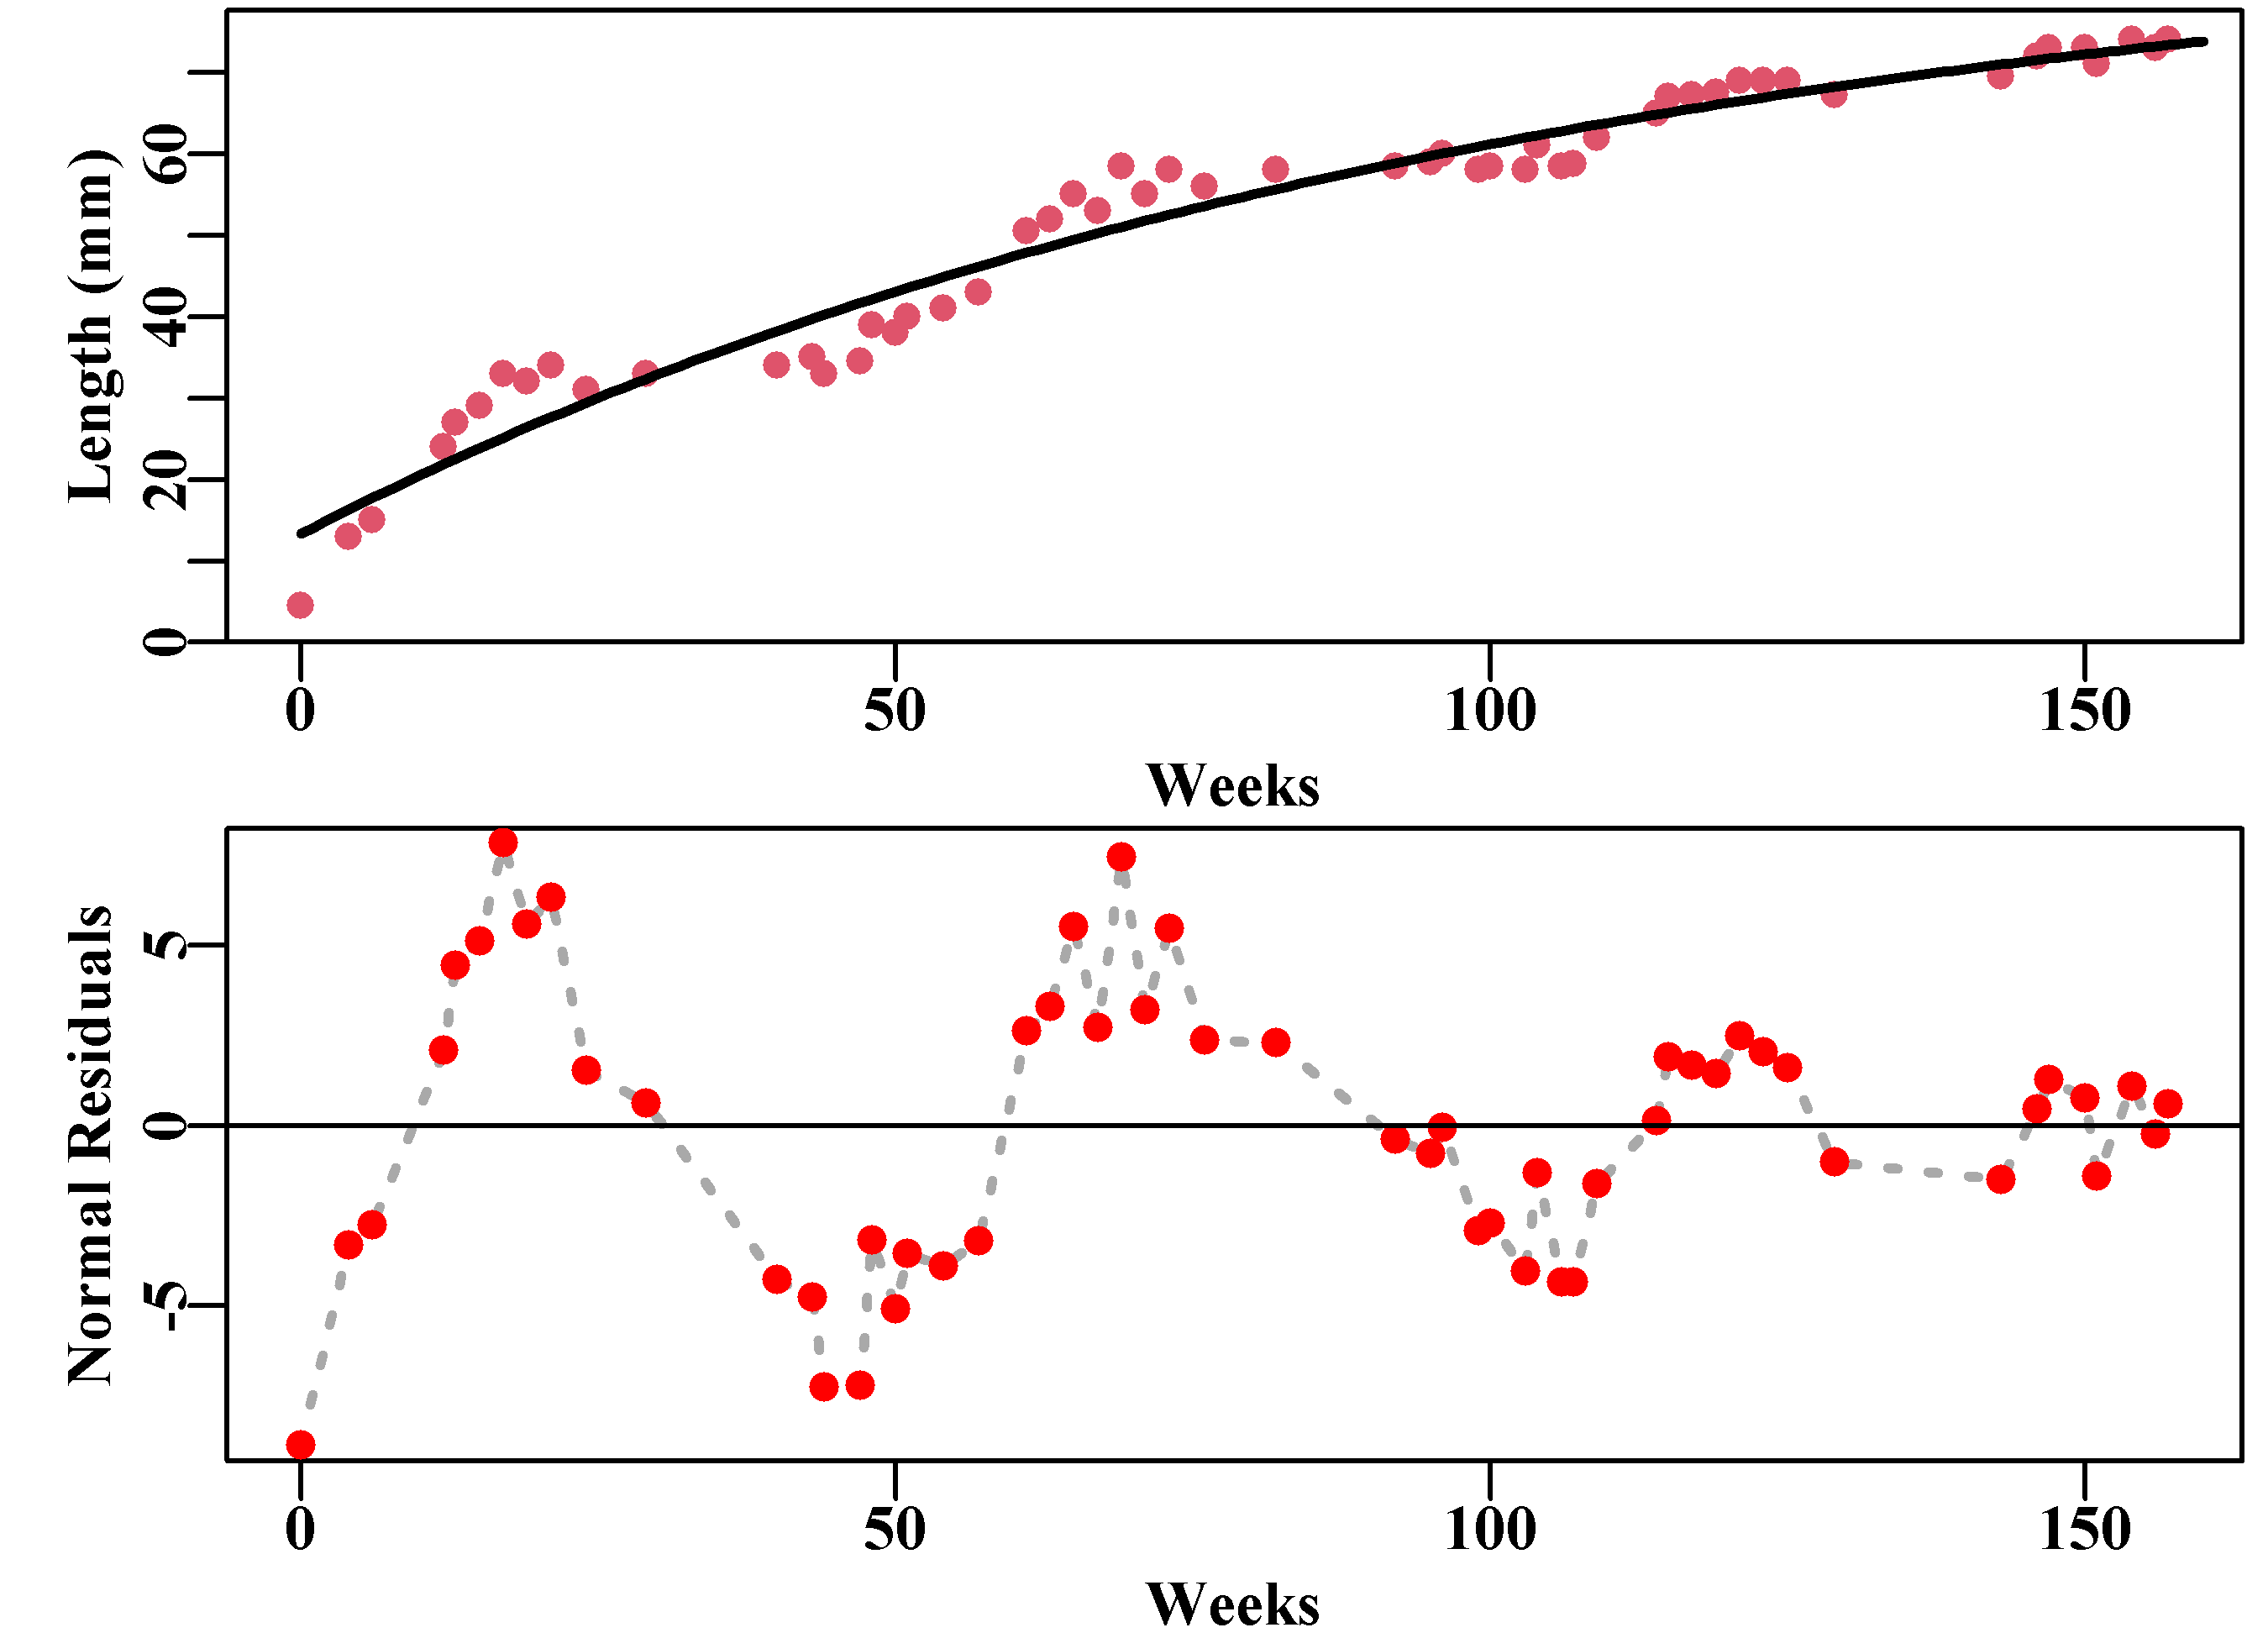 Length-at-age data derived from Pitcher and Macdonald (1973), illustrating strong seasonal growth fluctuations in growth rate when compared to the best fitting von Bertalanffy curve. The seasonal pattern in the normal random residuals in the bottom plot is very clear and reduces with age.